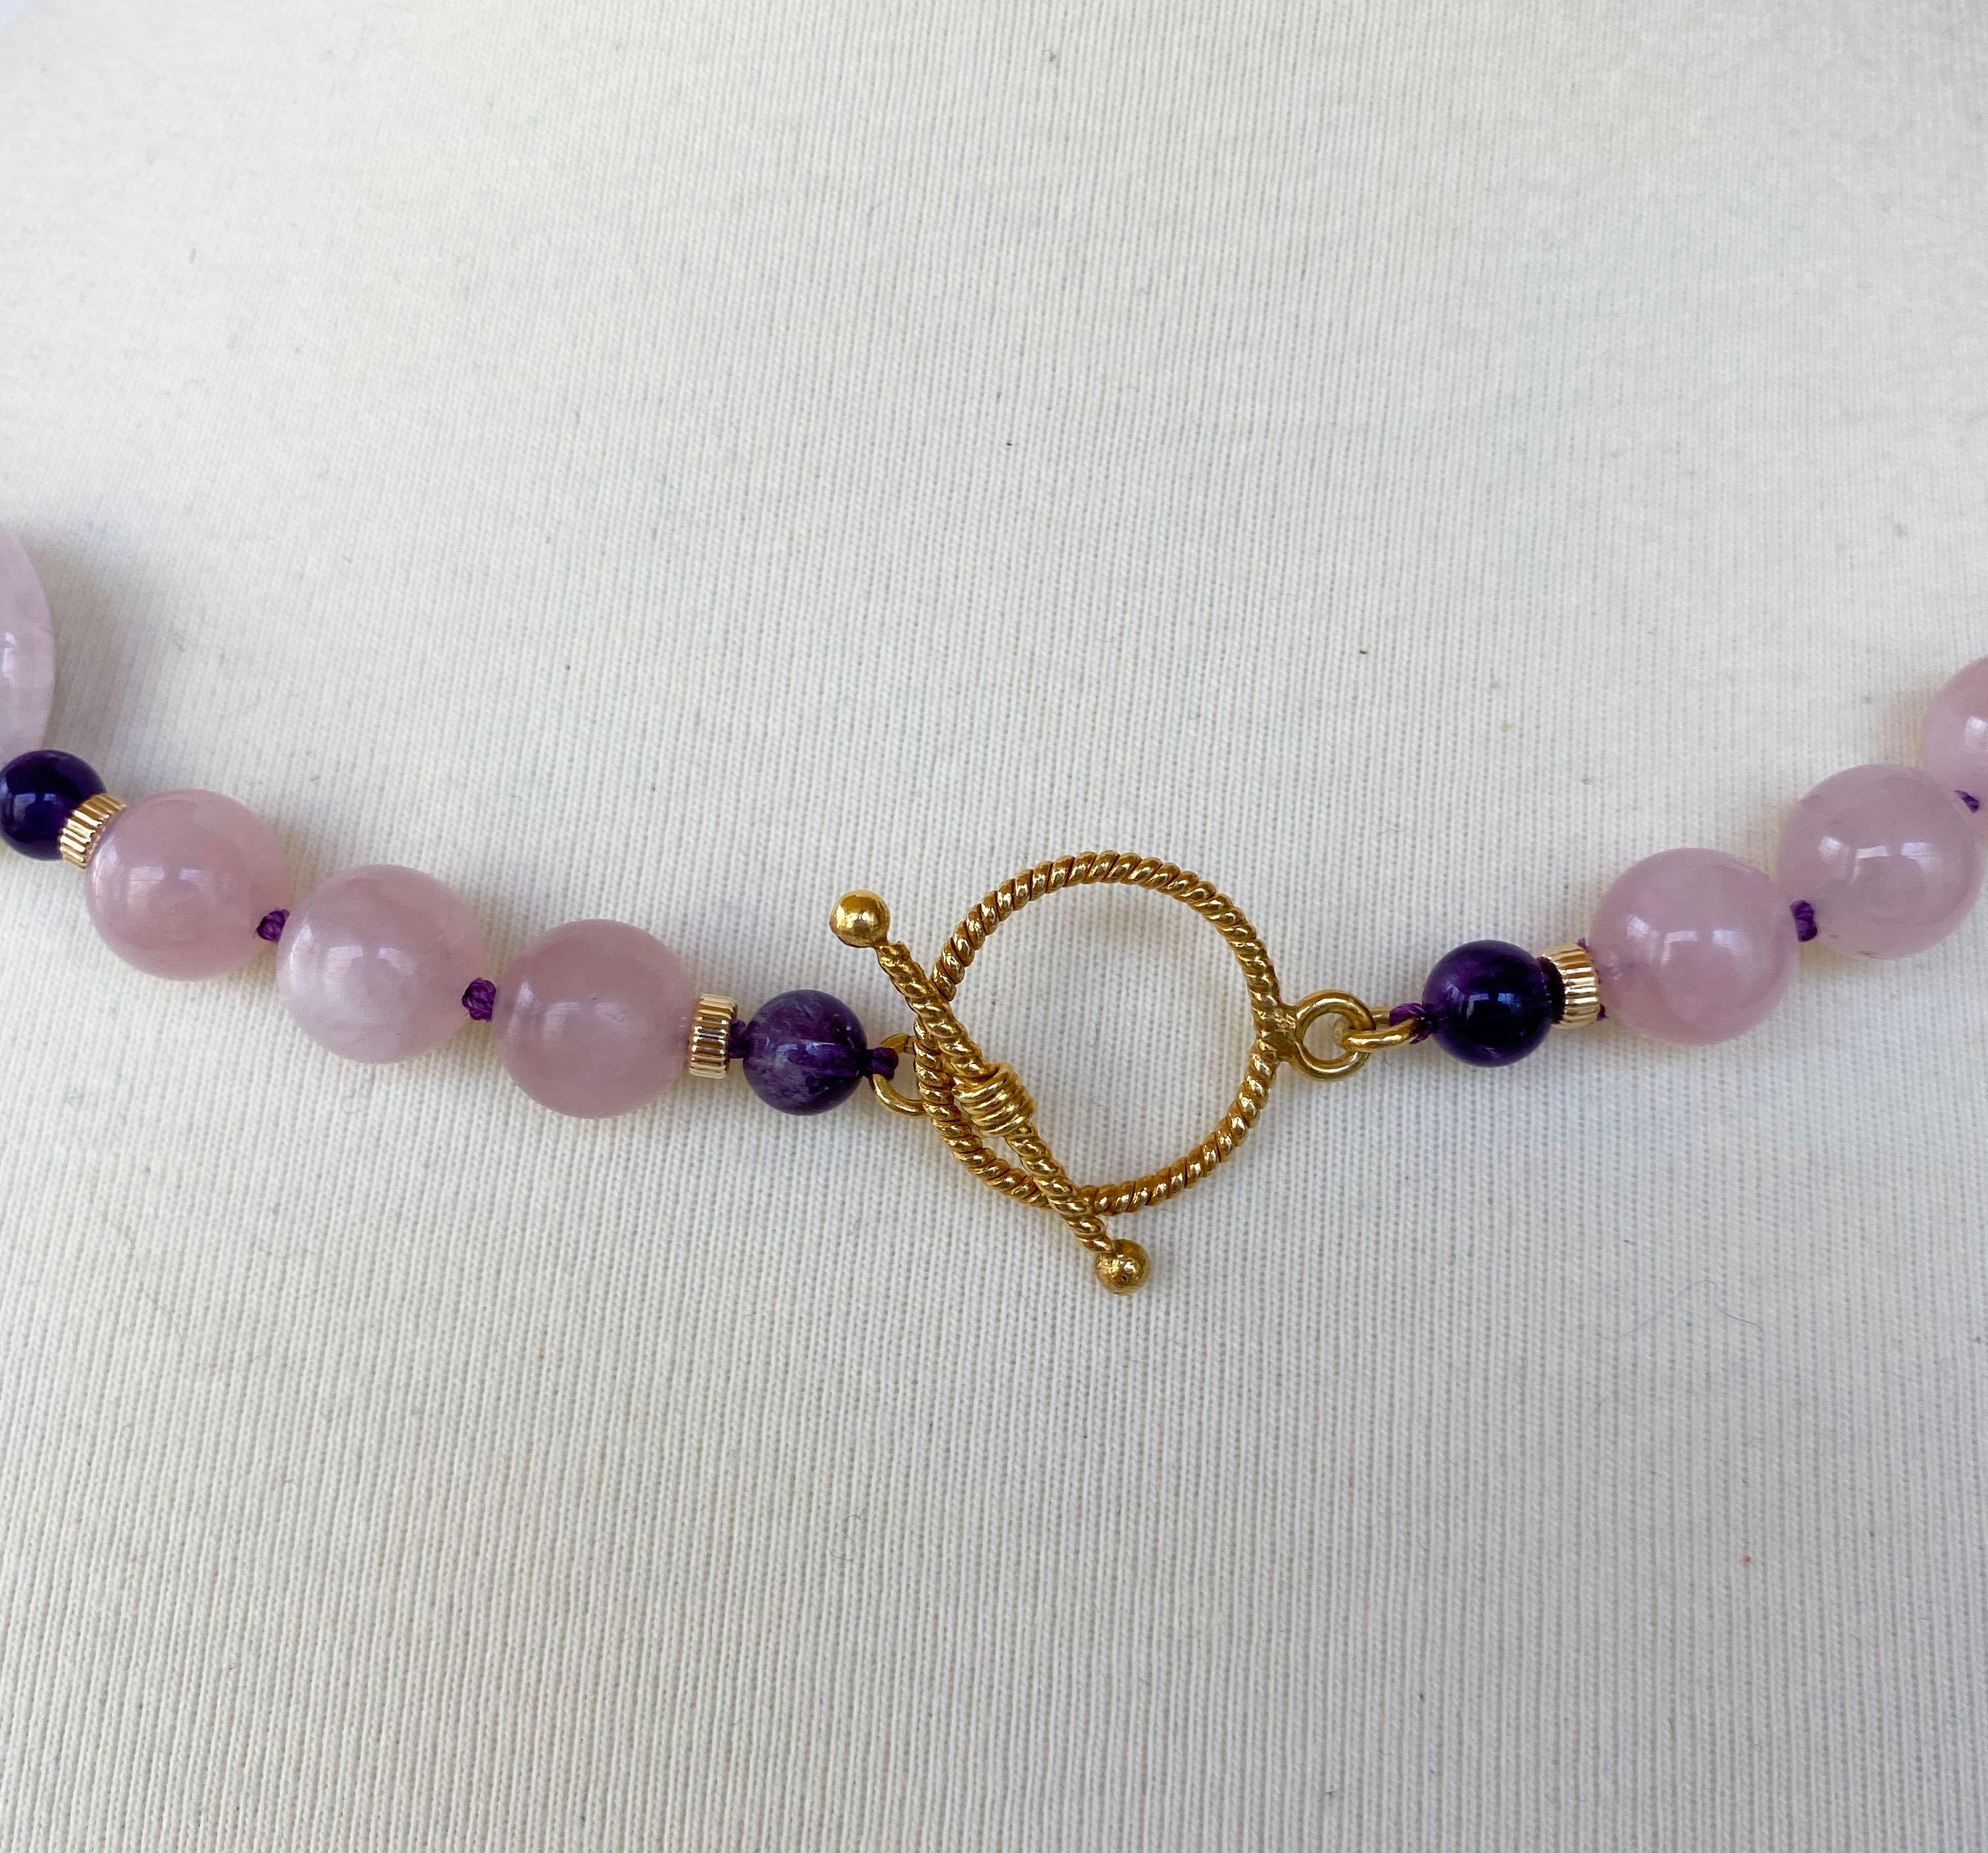 Artisan Marina J. Rose Quartz & Amethyst Necklace with Gold-Plated Toggle Clasp For Sale